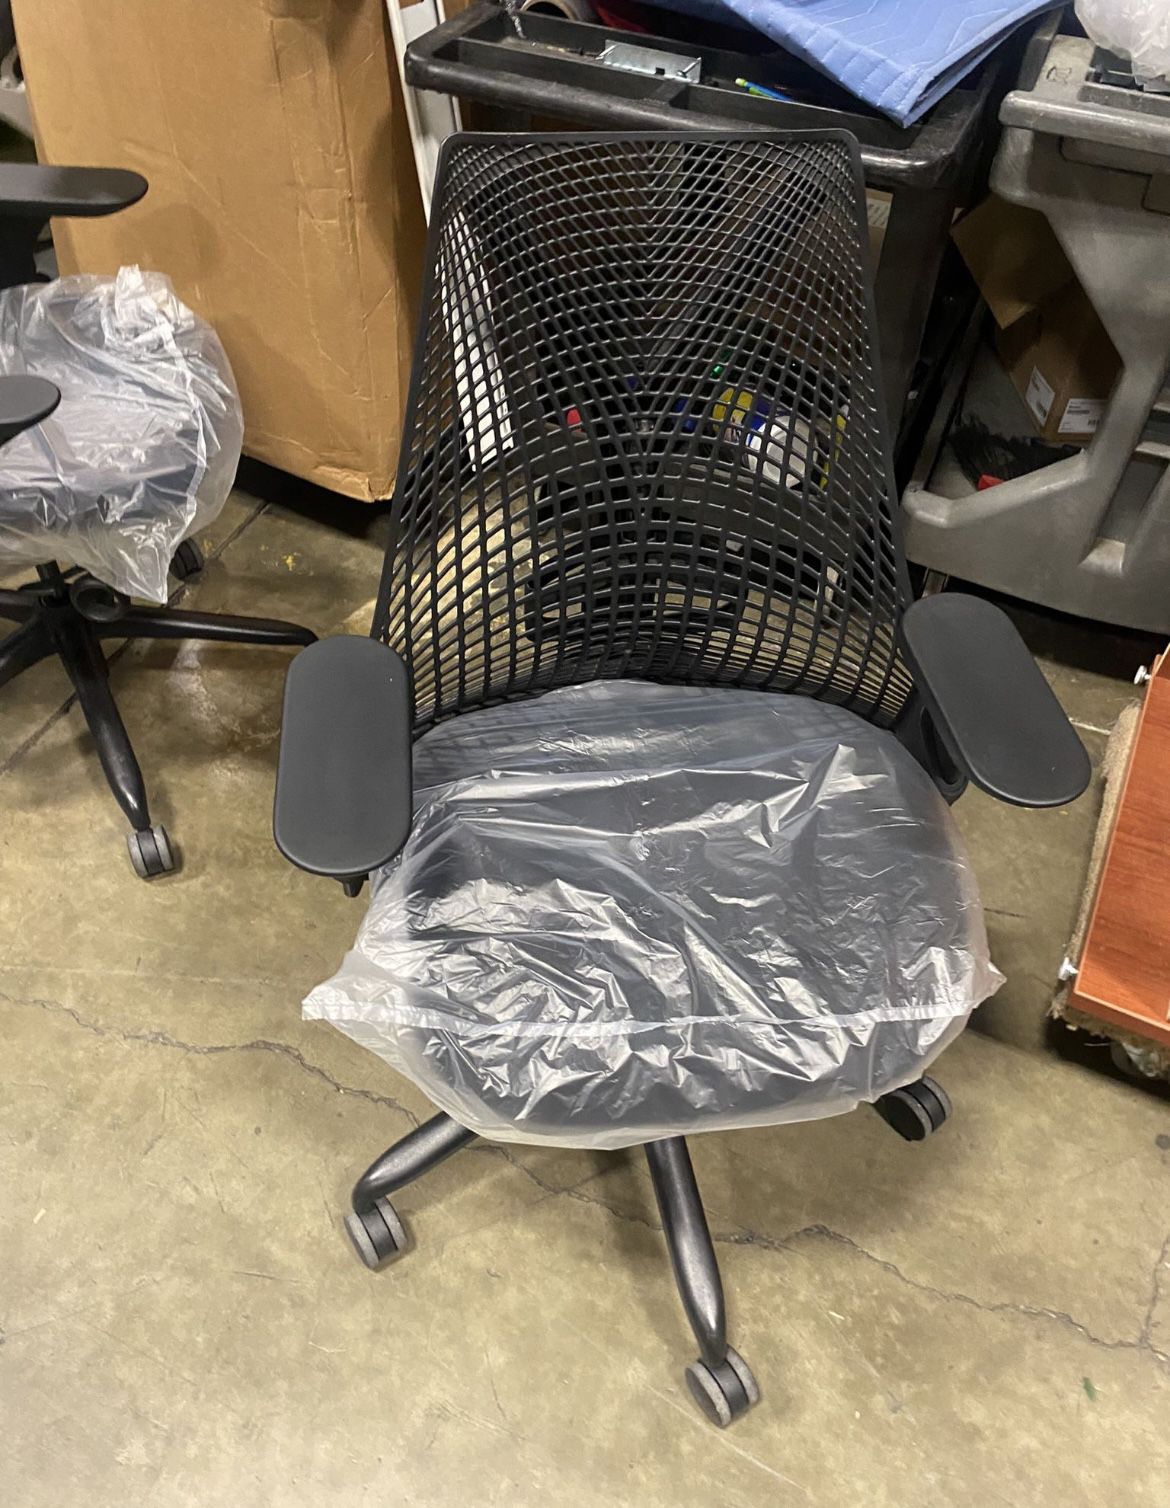 Herman Miller Fully Loaded Sayl Chair! We Also Have Standing Desk And Monitor Arms Available!